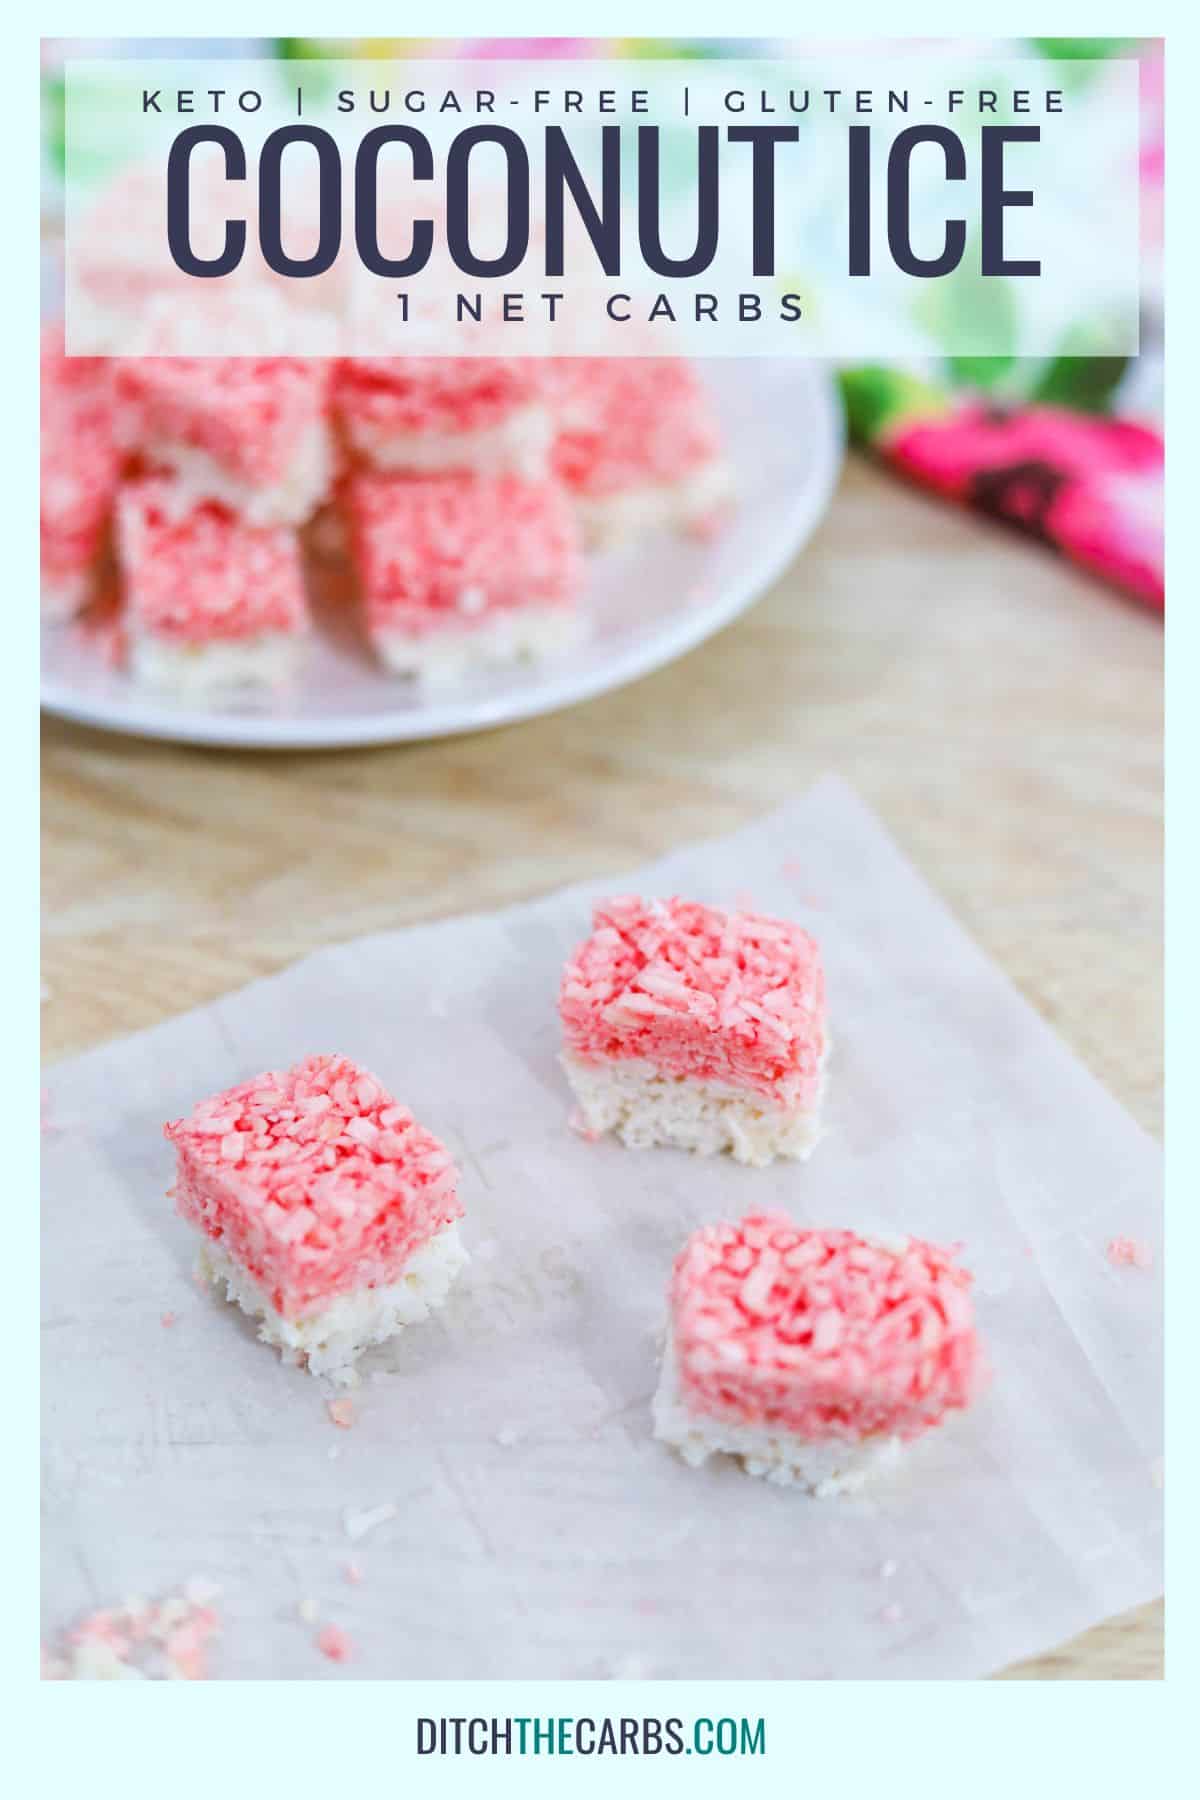 3 pieces of pink and white coconut ice on baking paper